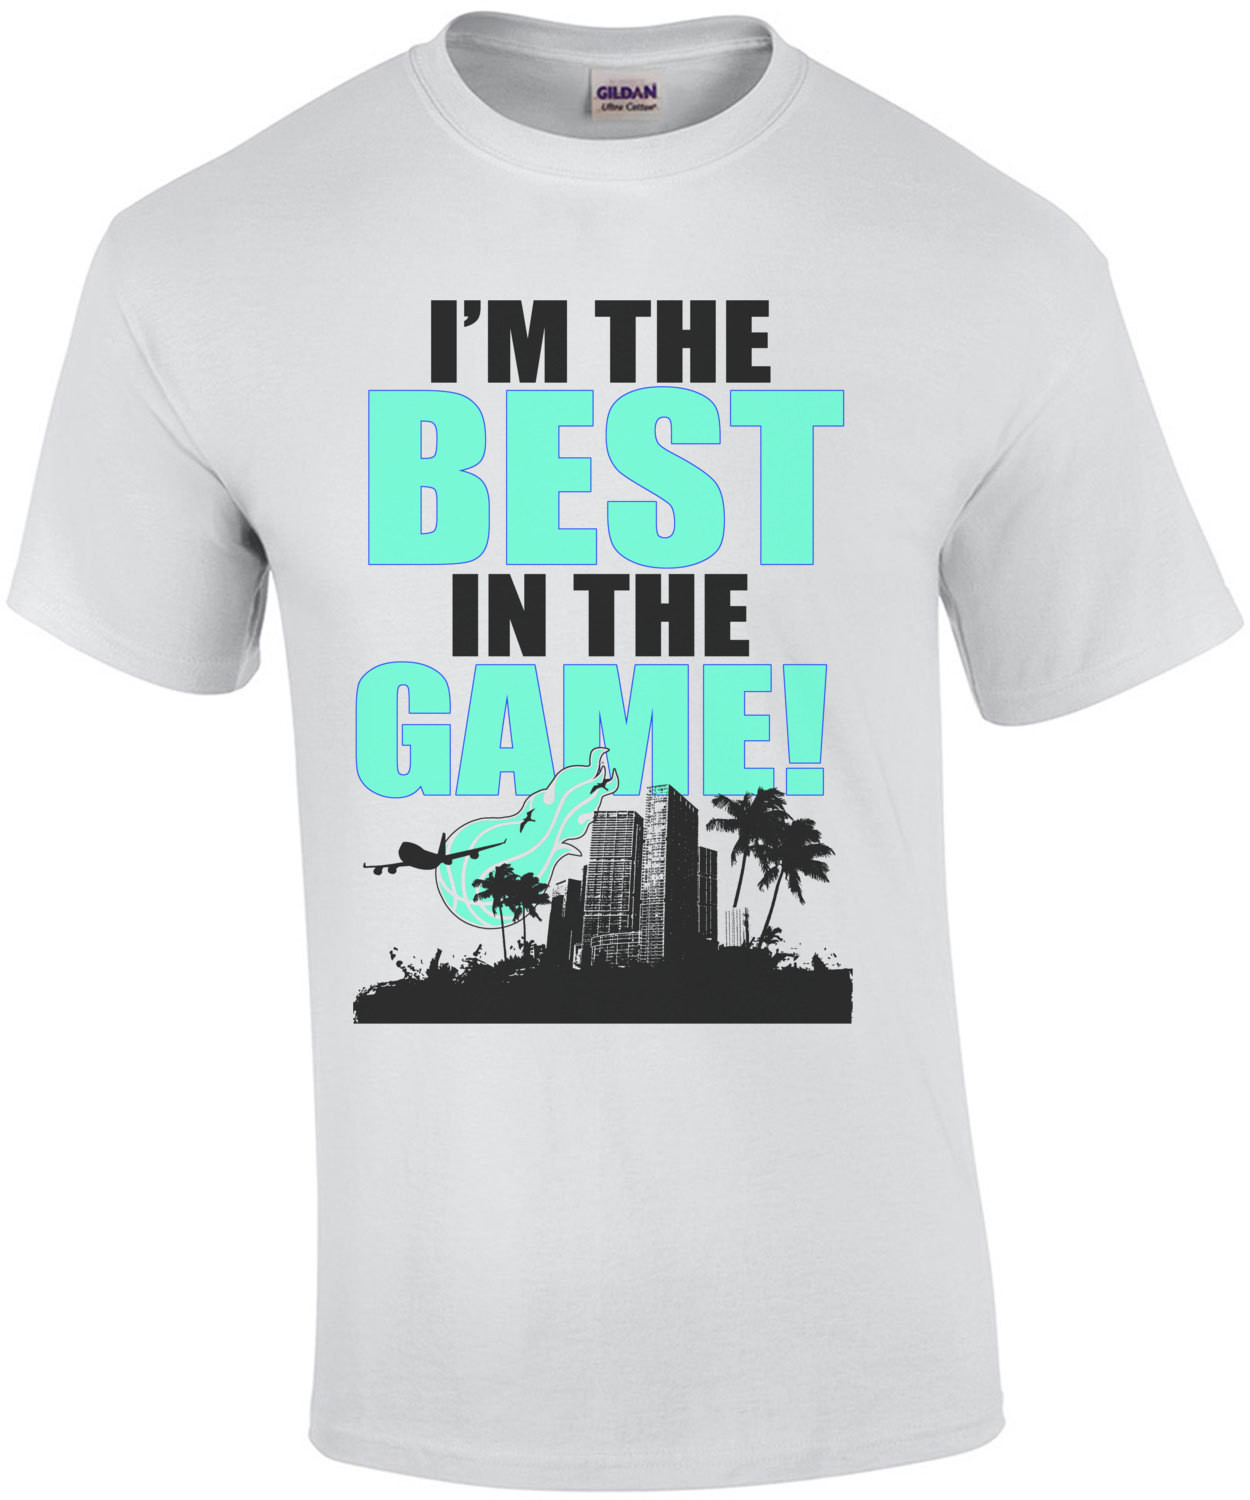 I'm The Best In The Game T-Shirt